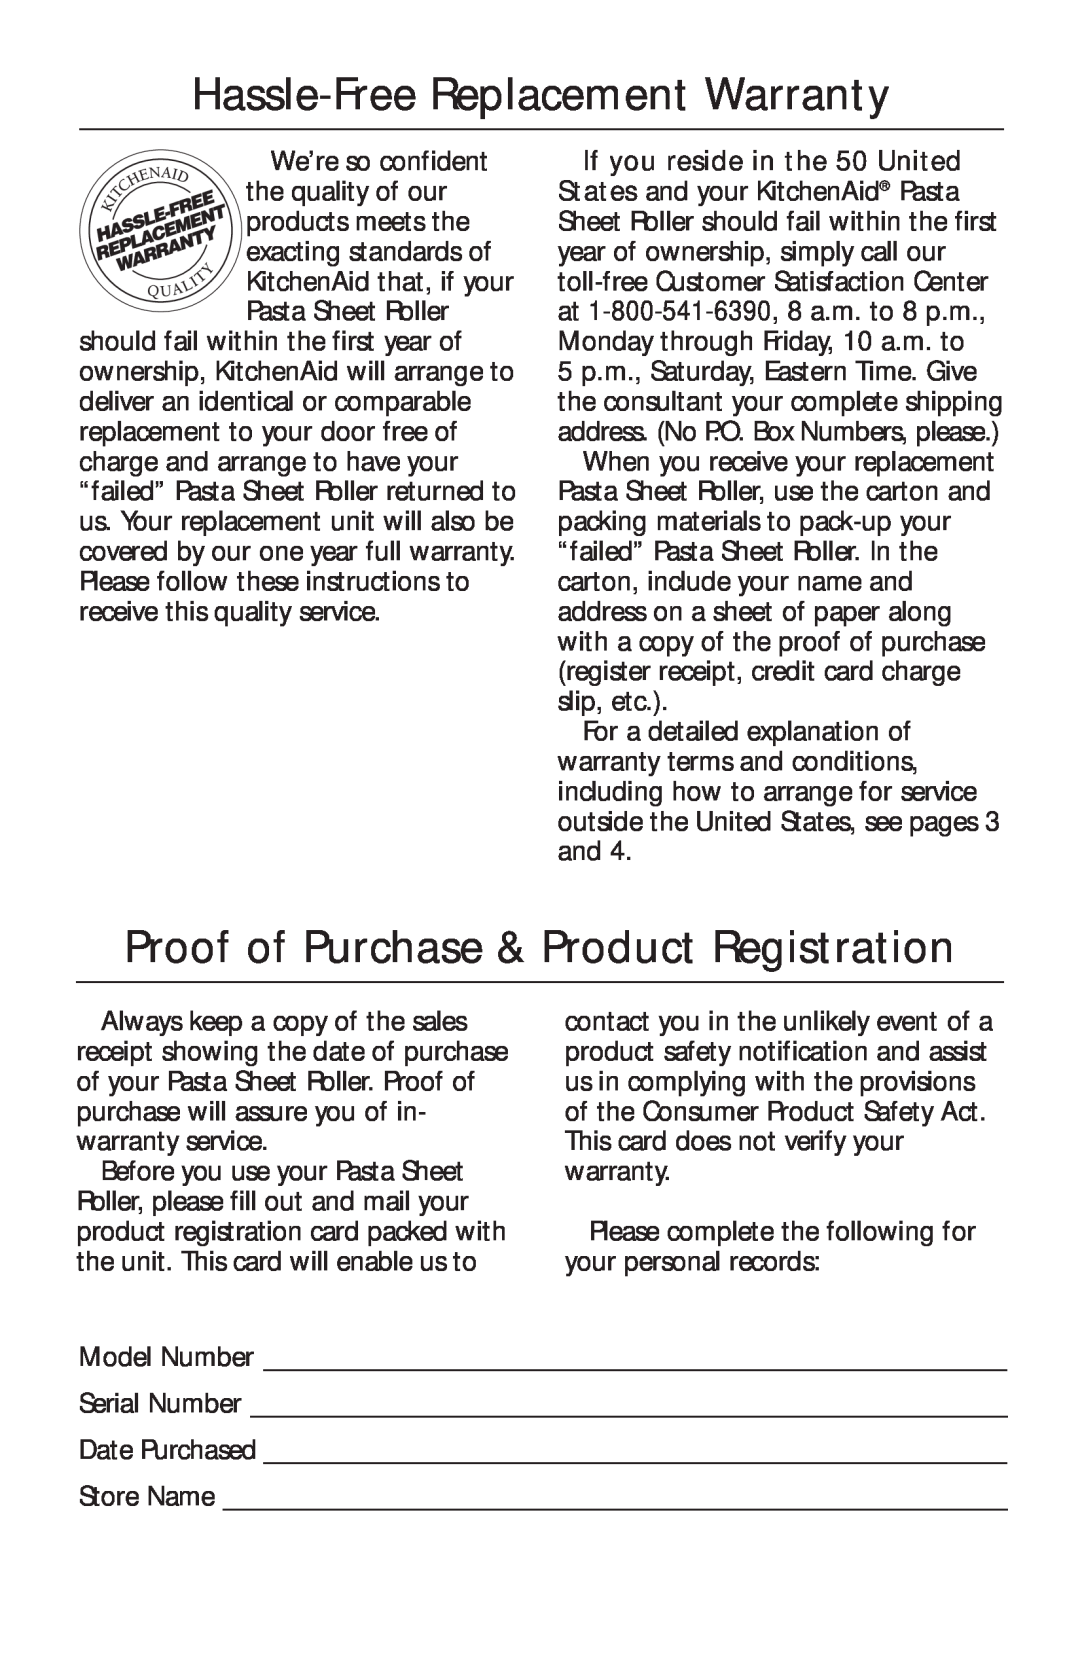 KitchenAid KPSA manual Hassle-Free Replacement Warranty, Proof of Purchase & Product Registration 